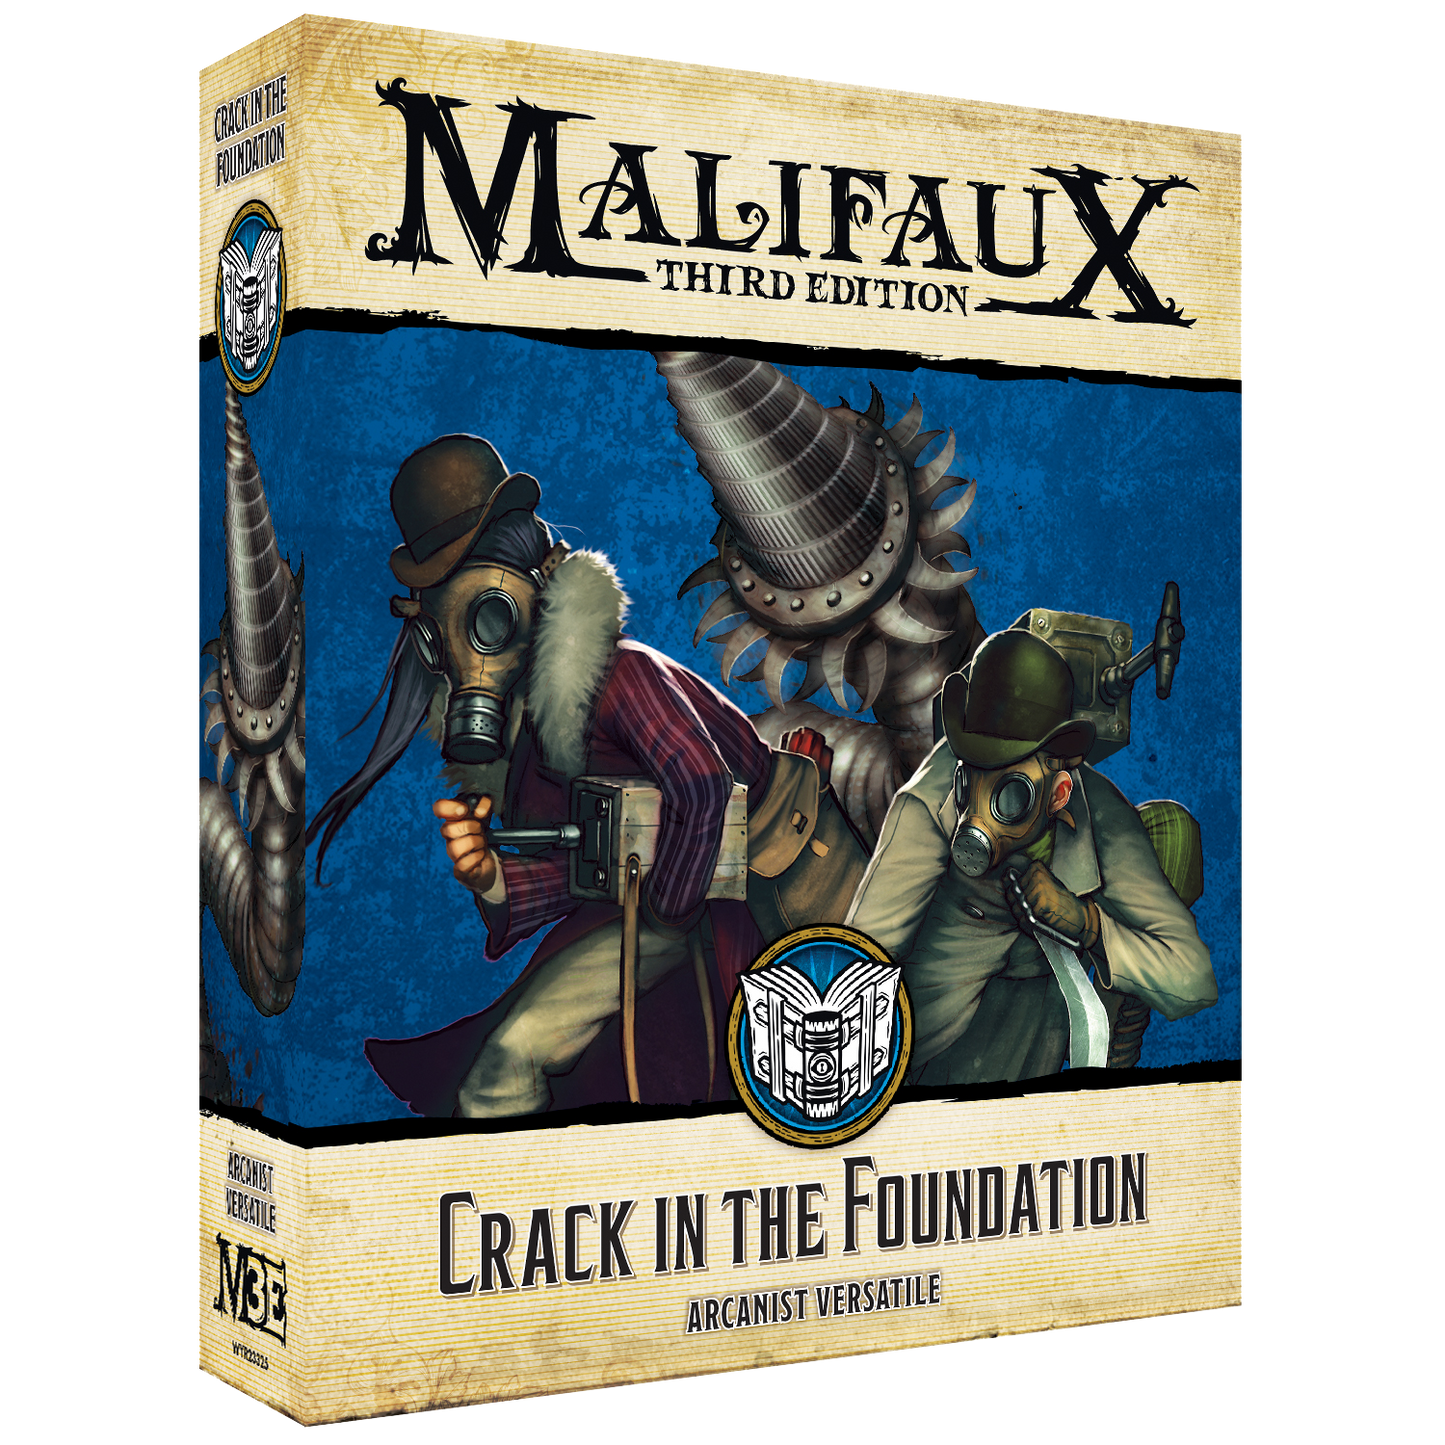 Crack in the Foundation - Wyrd Miniatures - Online Store